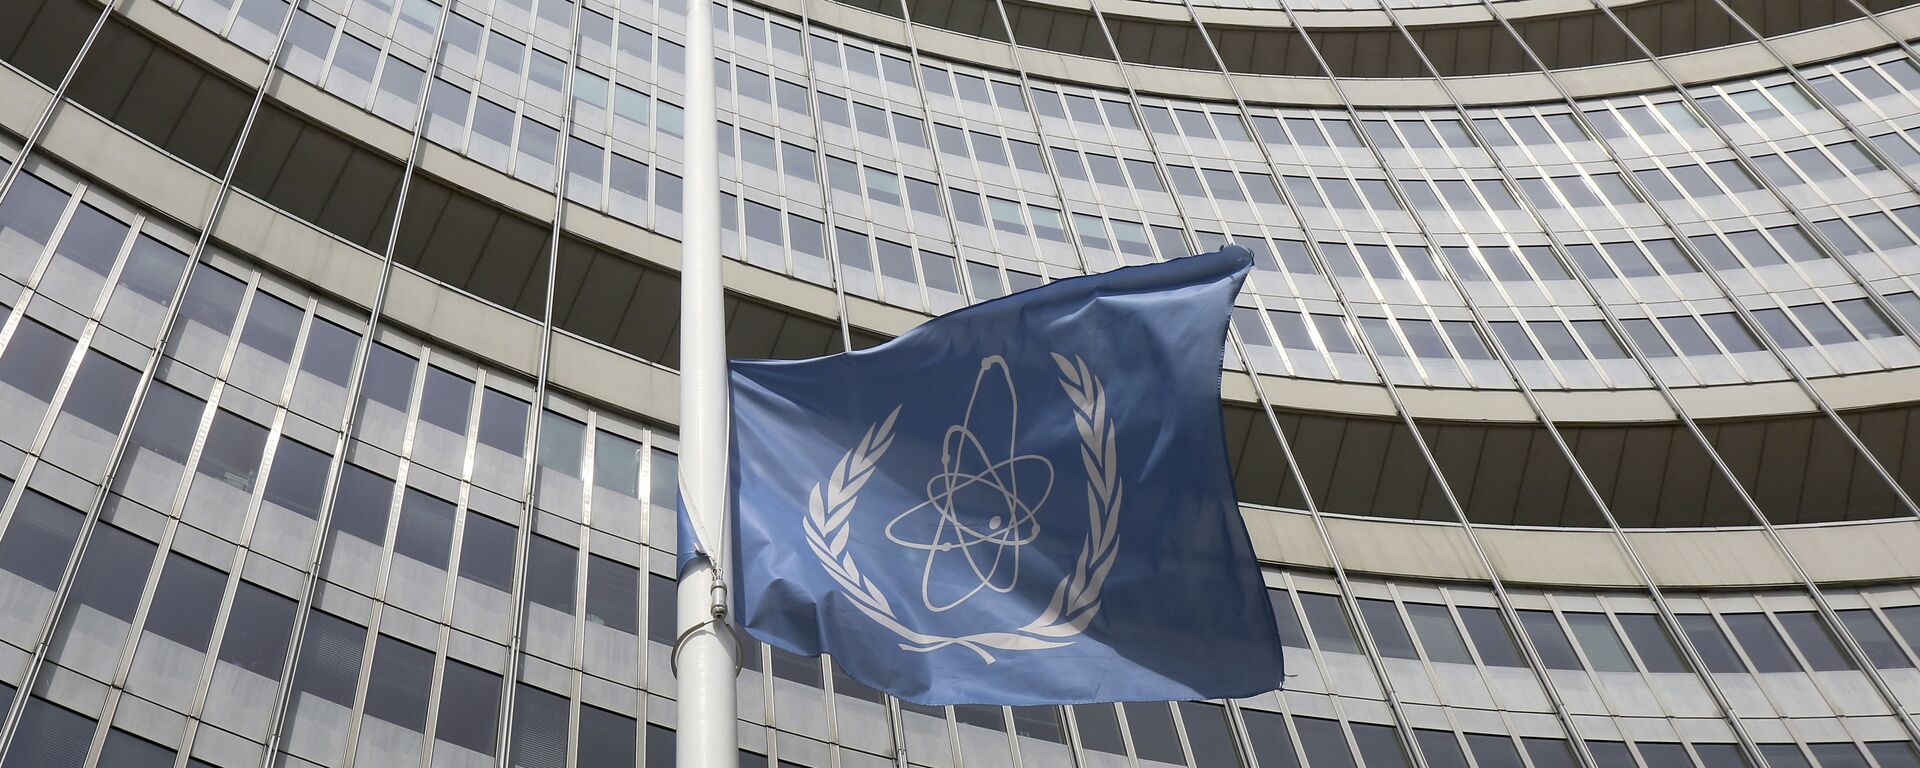 A flag is set to half mast in front of the International Atomic Energy Agency (IAEA) building in Vienna, Austria, Monday, July 22, 2019. - Sputnik International, 1920, 27.04.2022